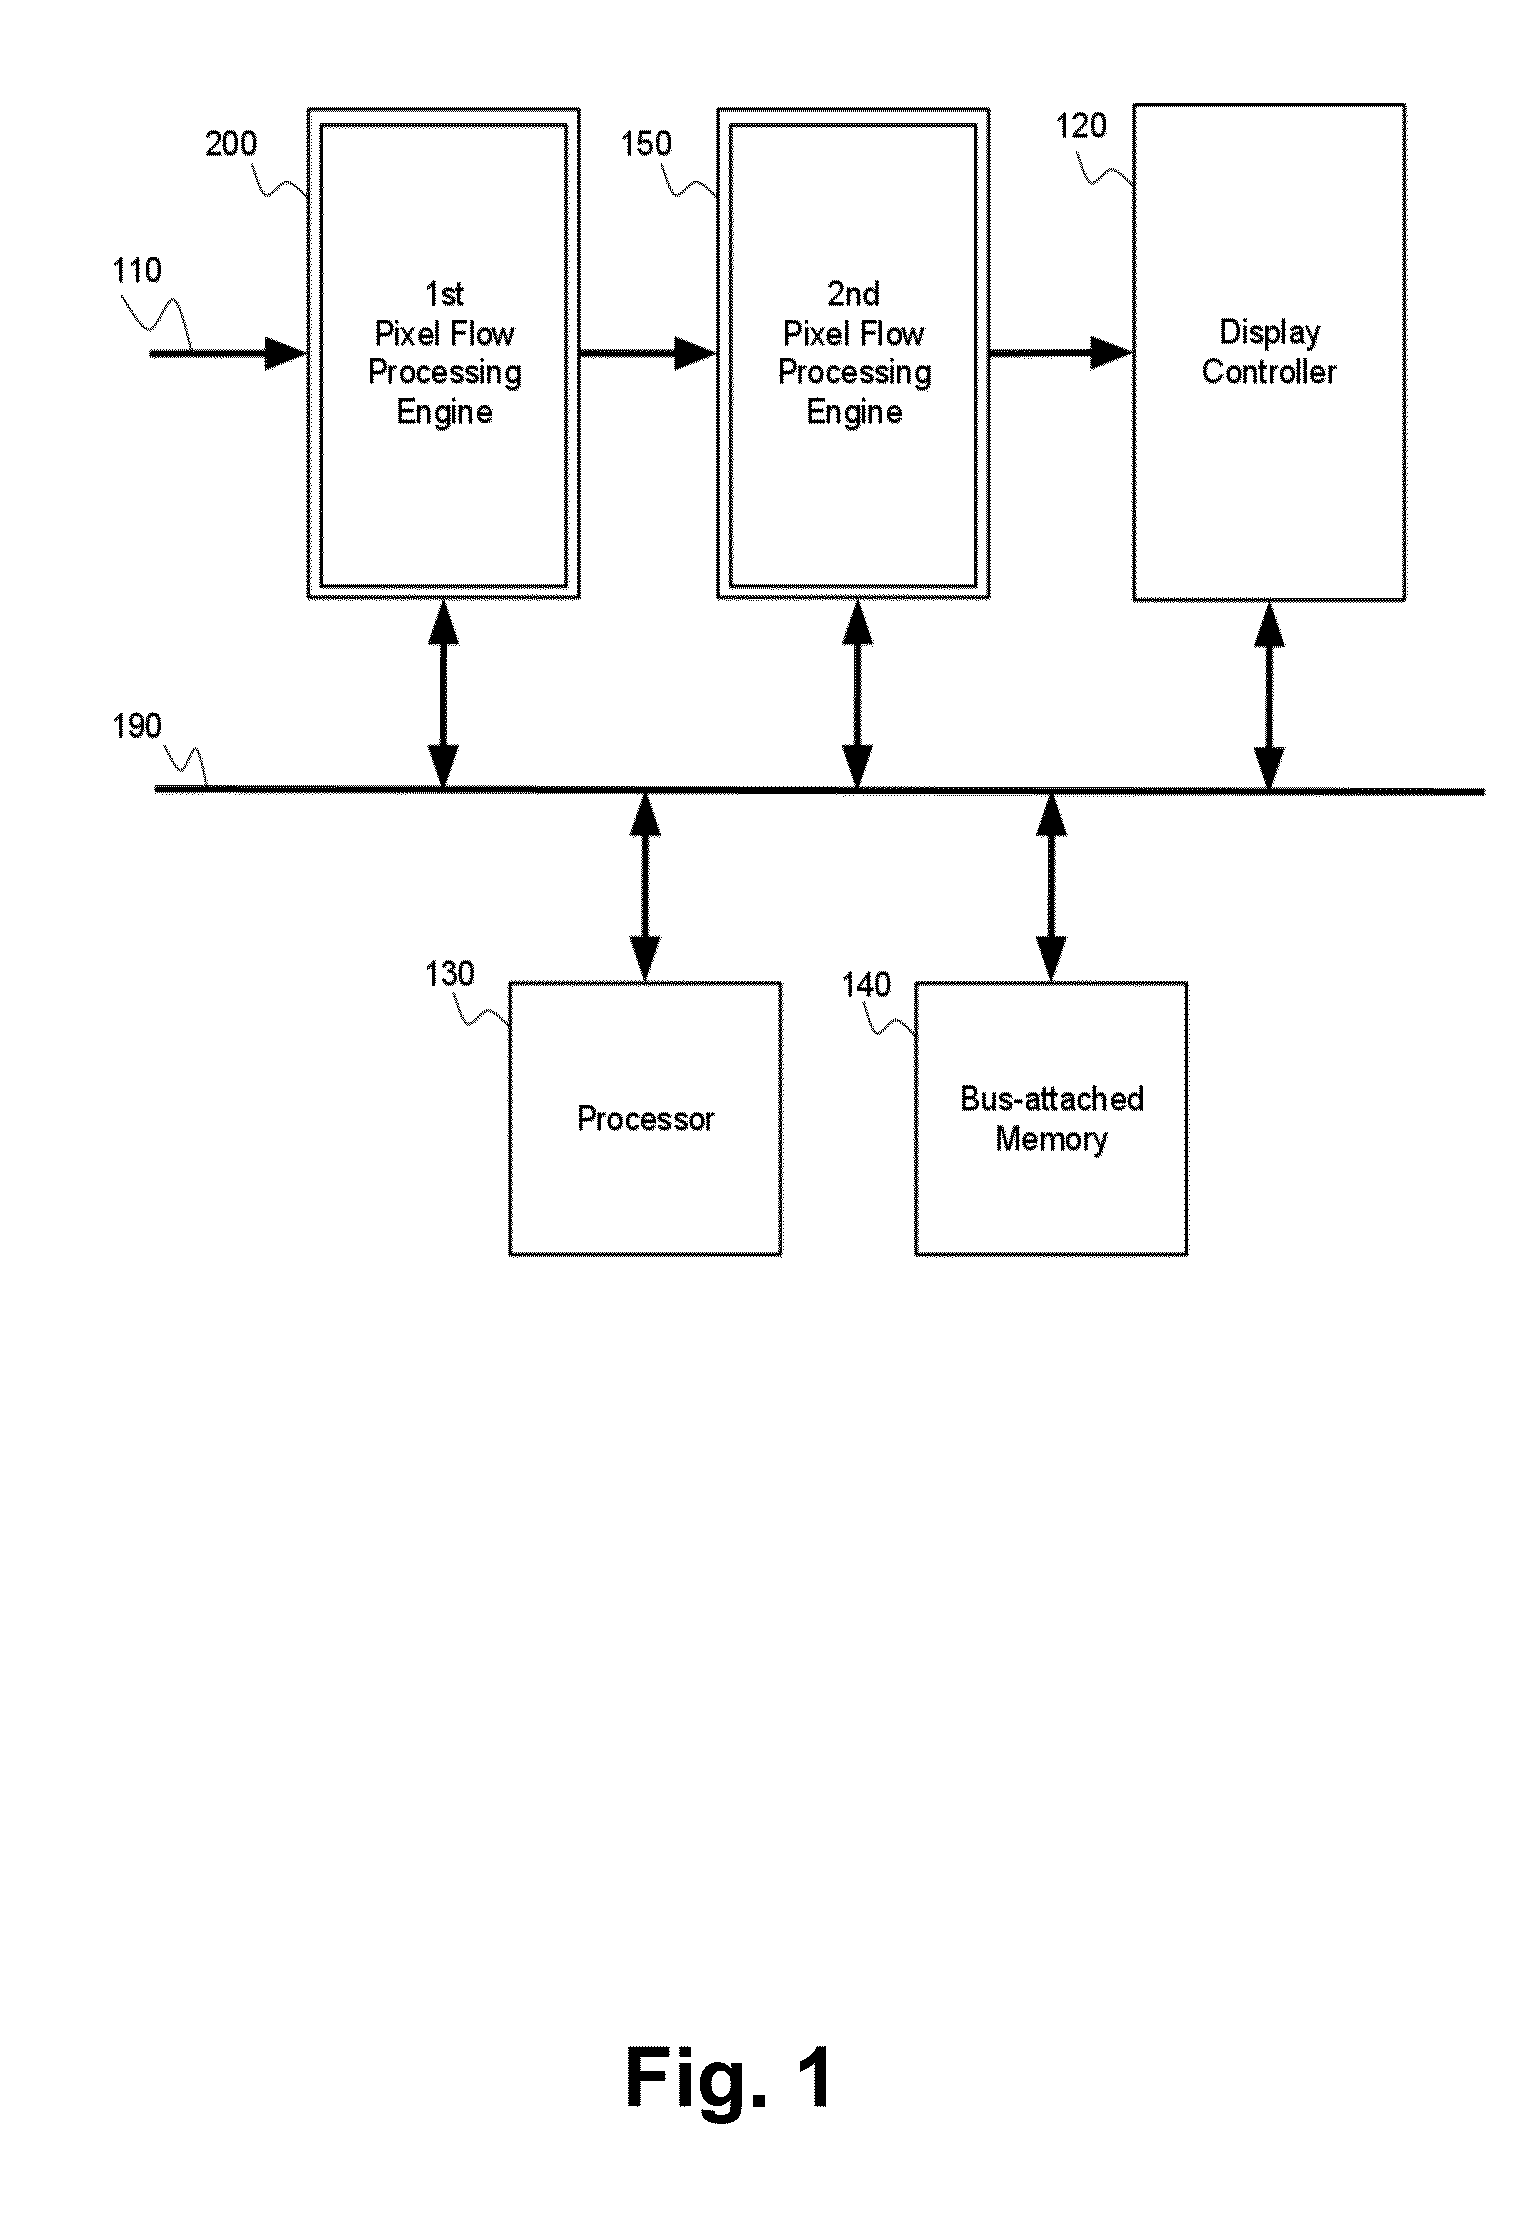 Pixel flow processing apparatus with integrated connected components labeling